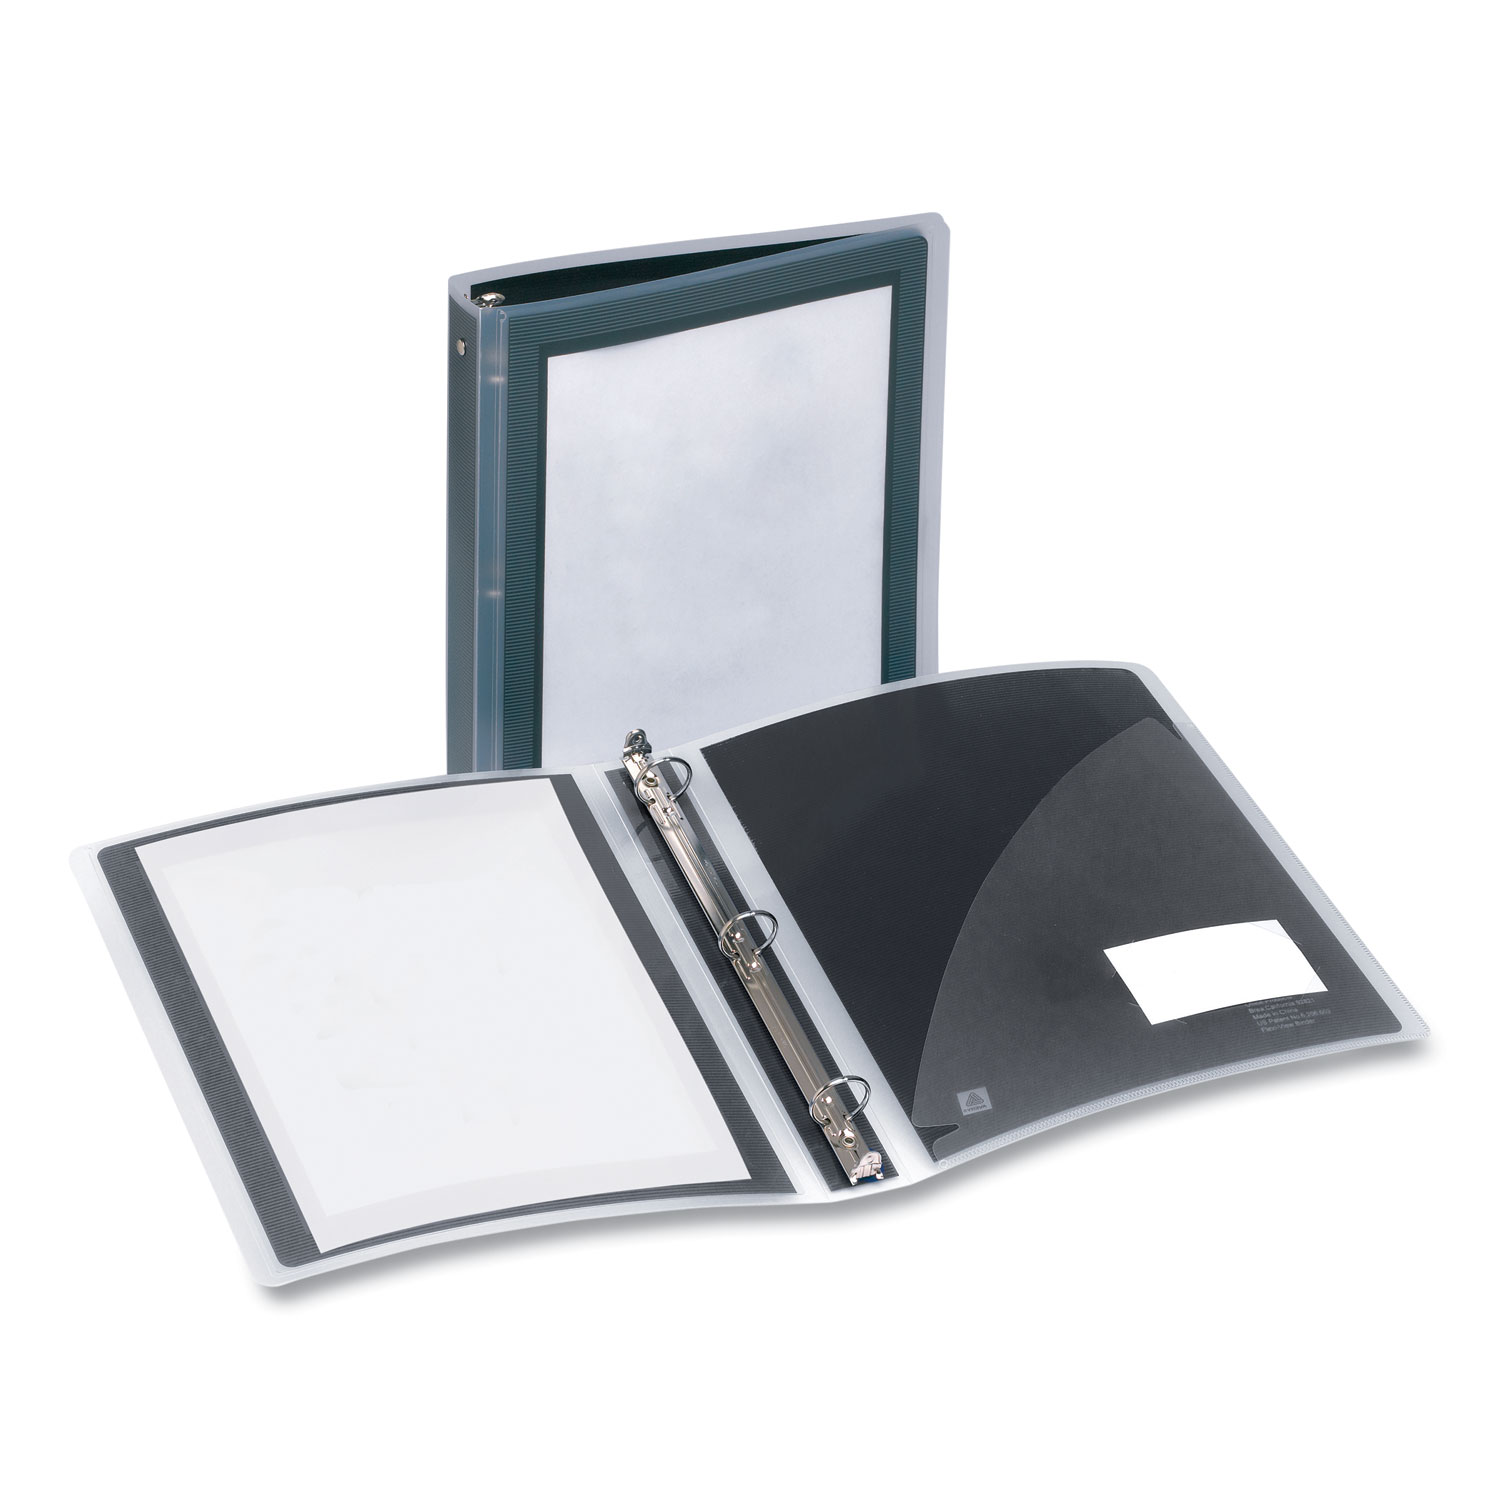 Binder Sizes: Dimensions & Capacities for 3-Ring Binders – PRINT Magazine